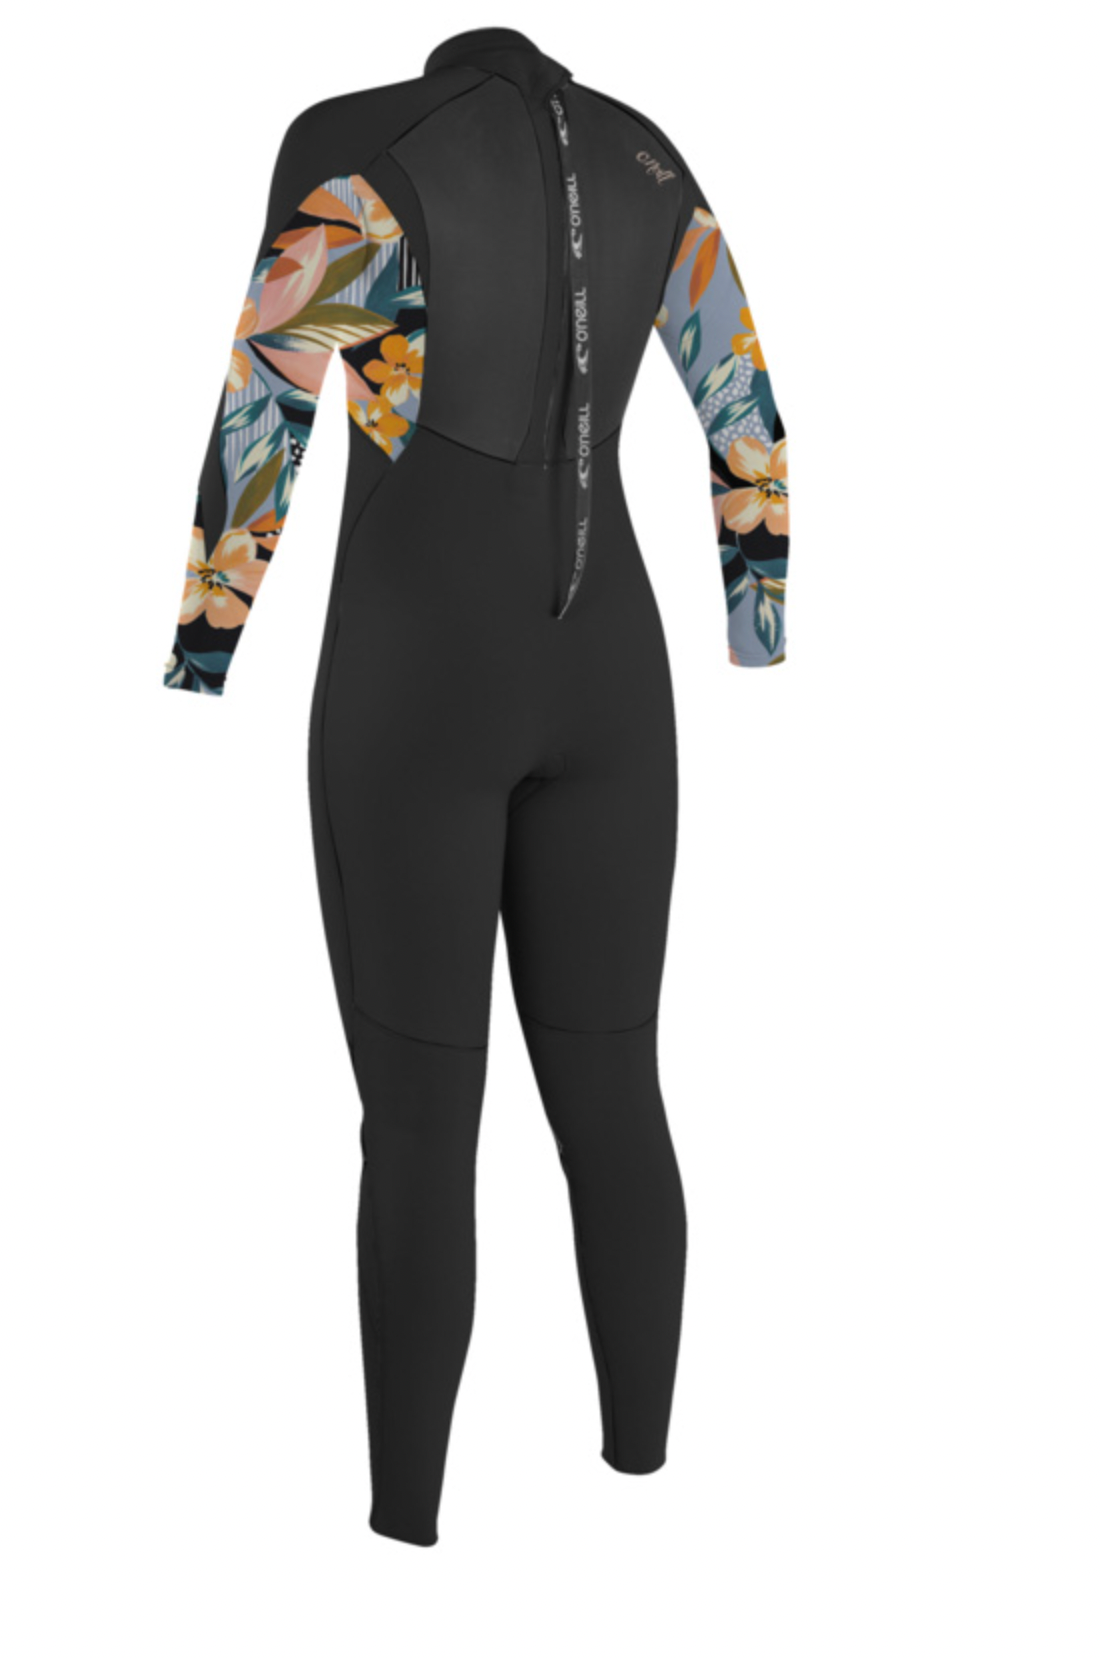 O'Neill Epic 3/2 Womens Back Zip Full Wetsuit Black/Demi Floral